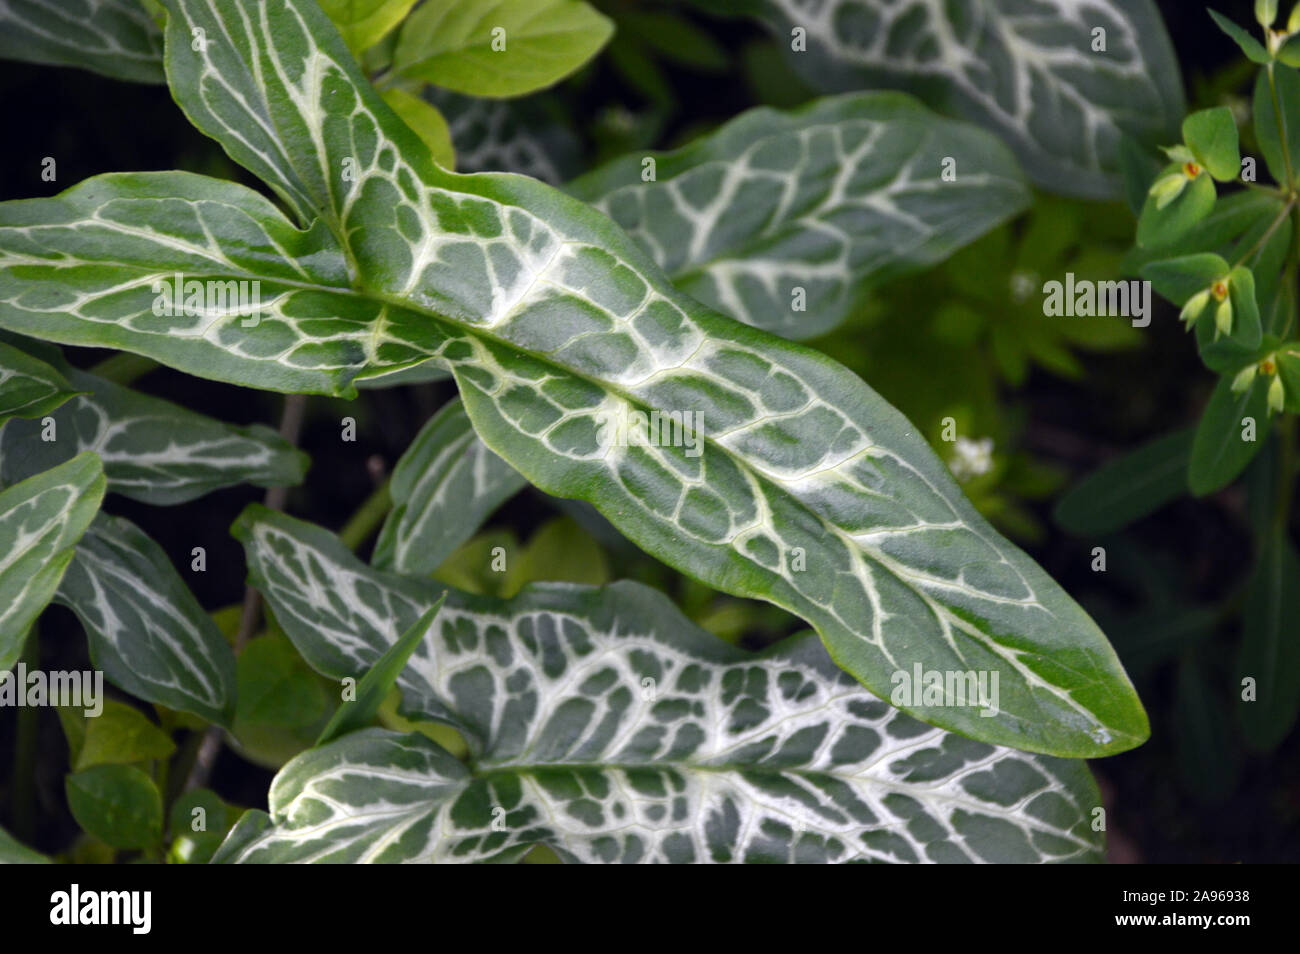 Italian arum 'italicum' lily (Marmoratum/Pictum) veined white Leaves growing in a Border at RHS Garden Harlow Carr, Harrogate, Yorkshire. England. Stock Photo